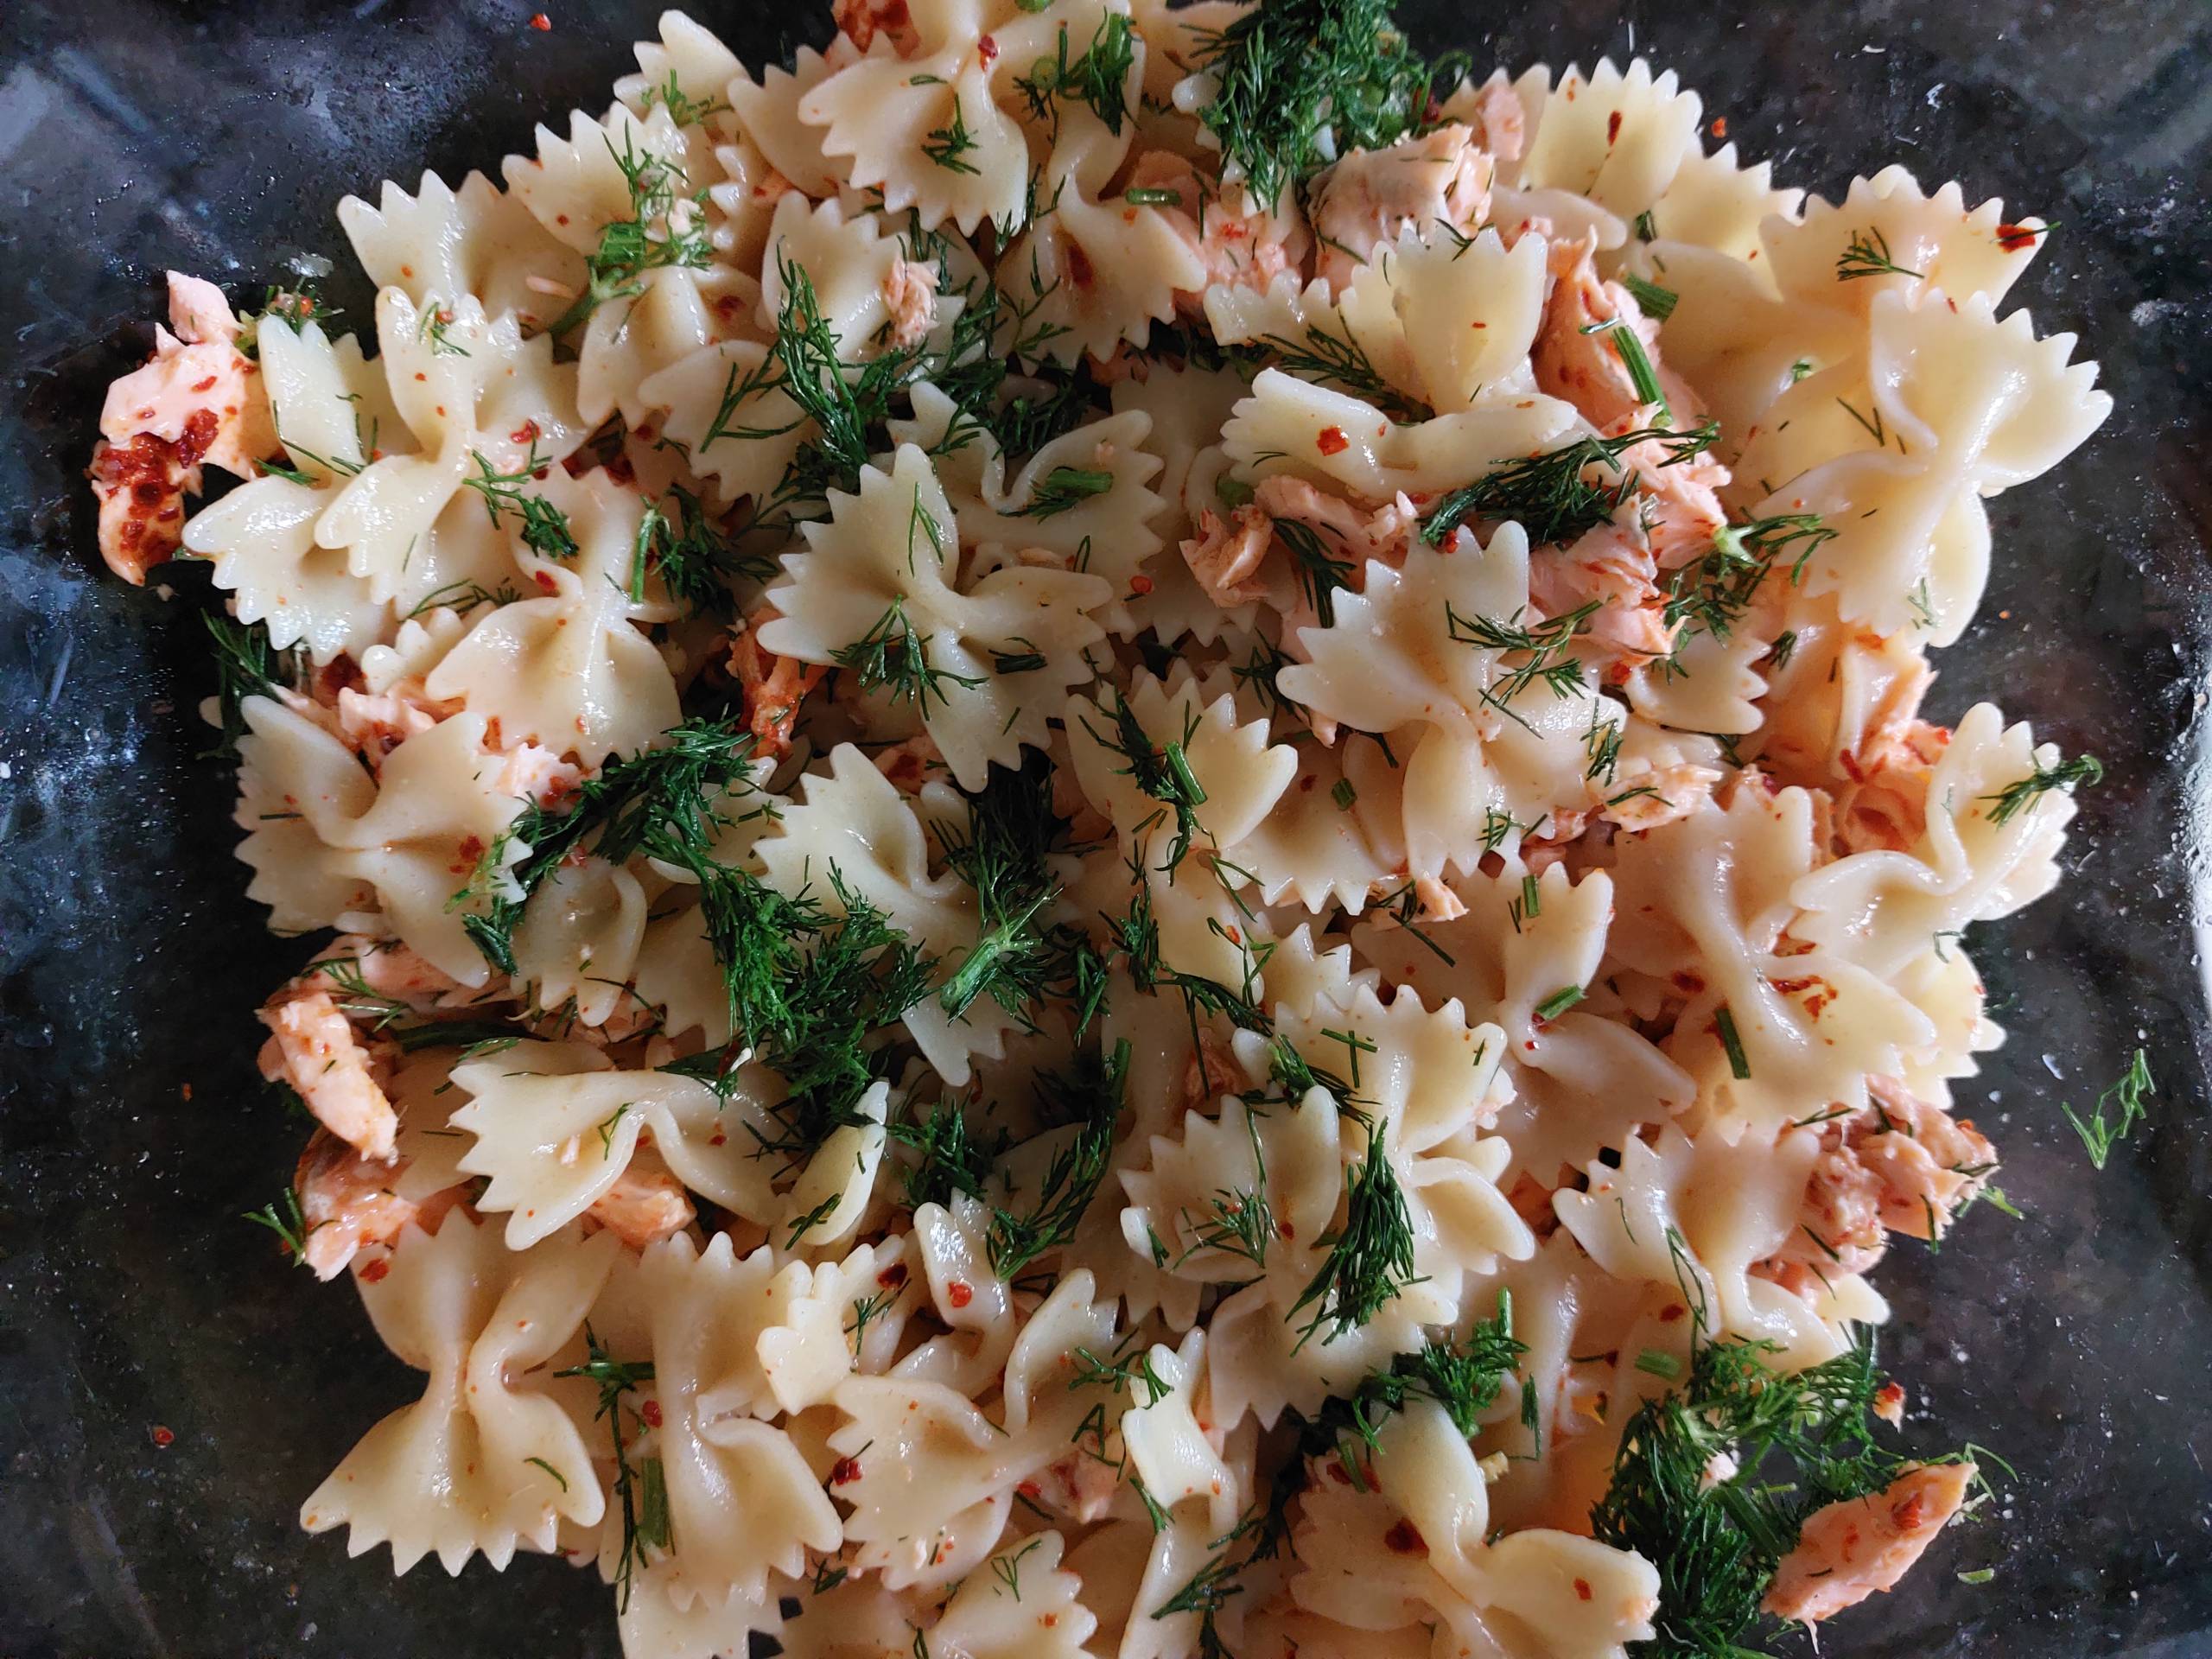 Lemony Salmon Farfalle Pasta with Chili Flakes and Dill